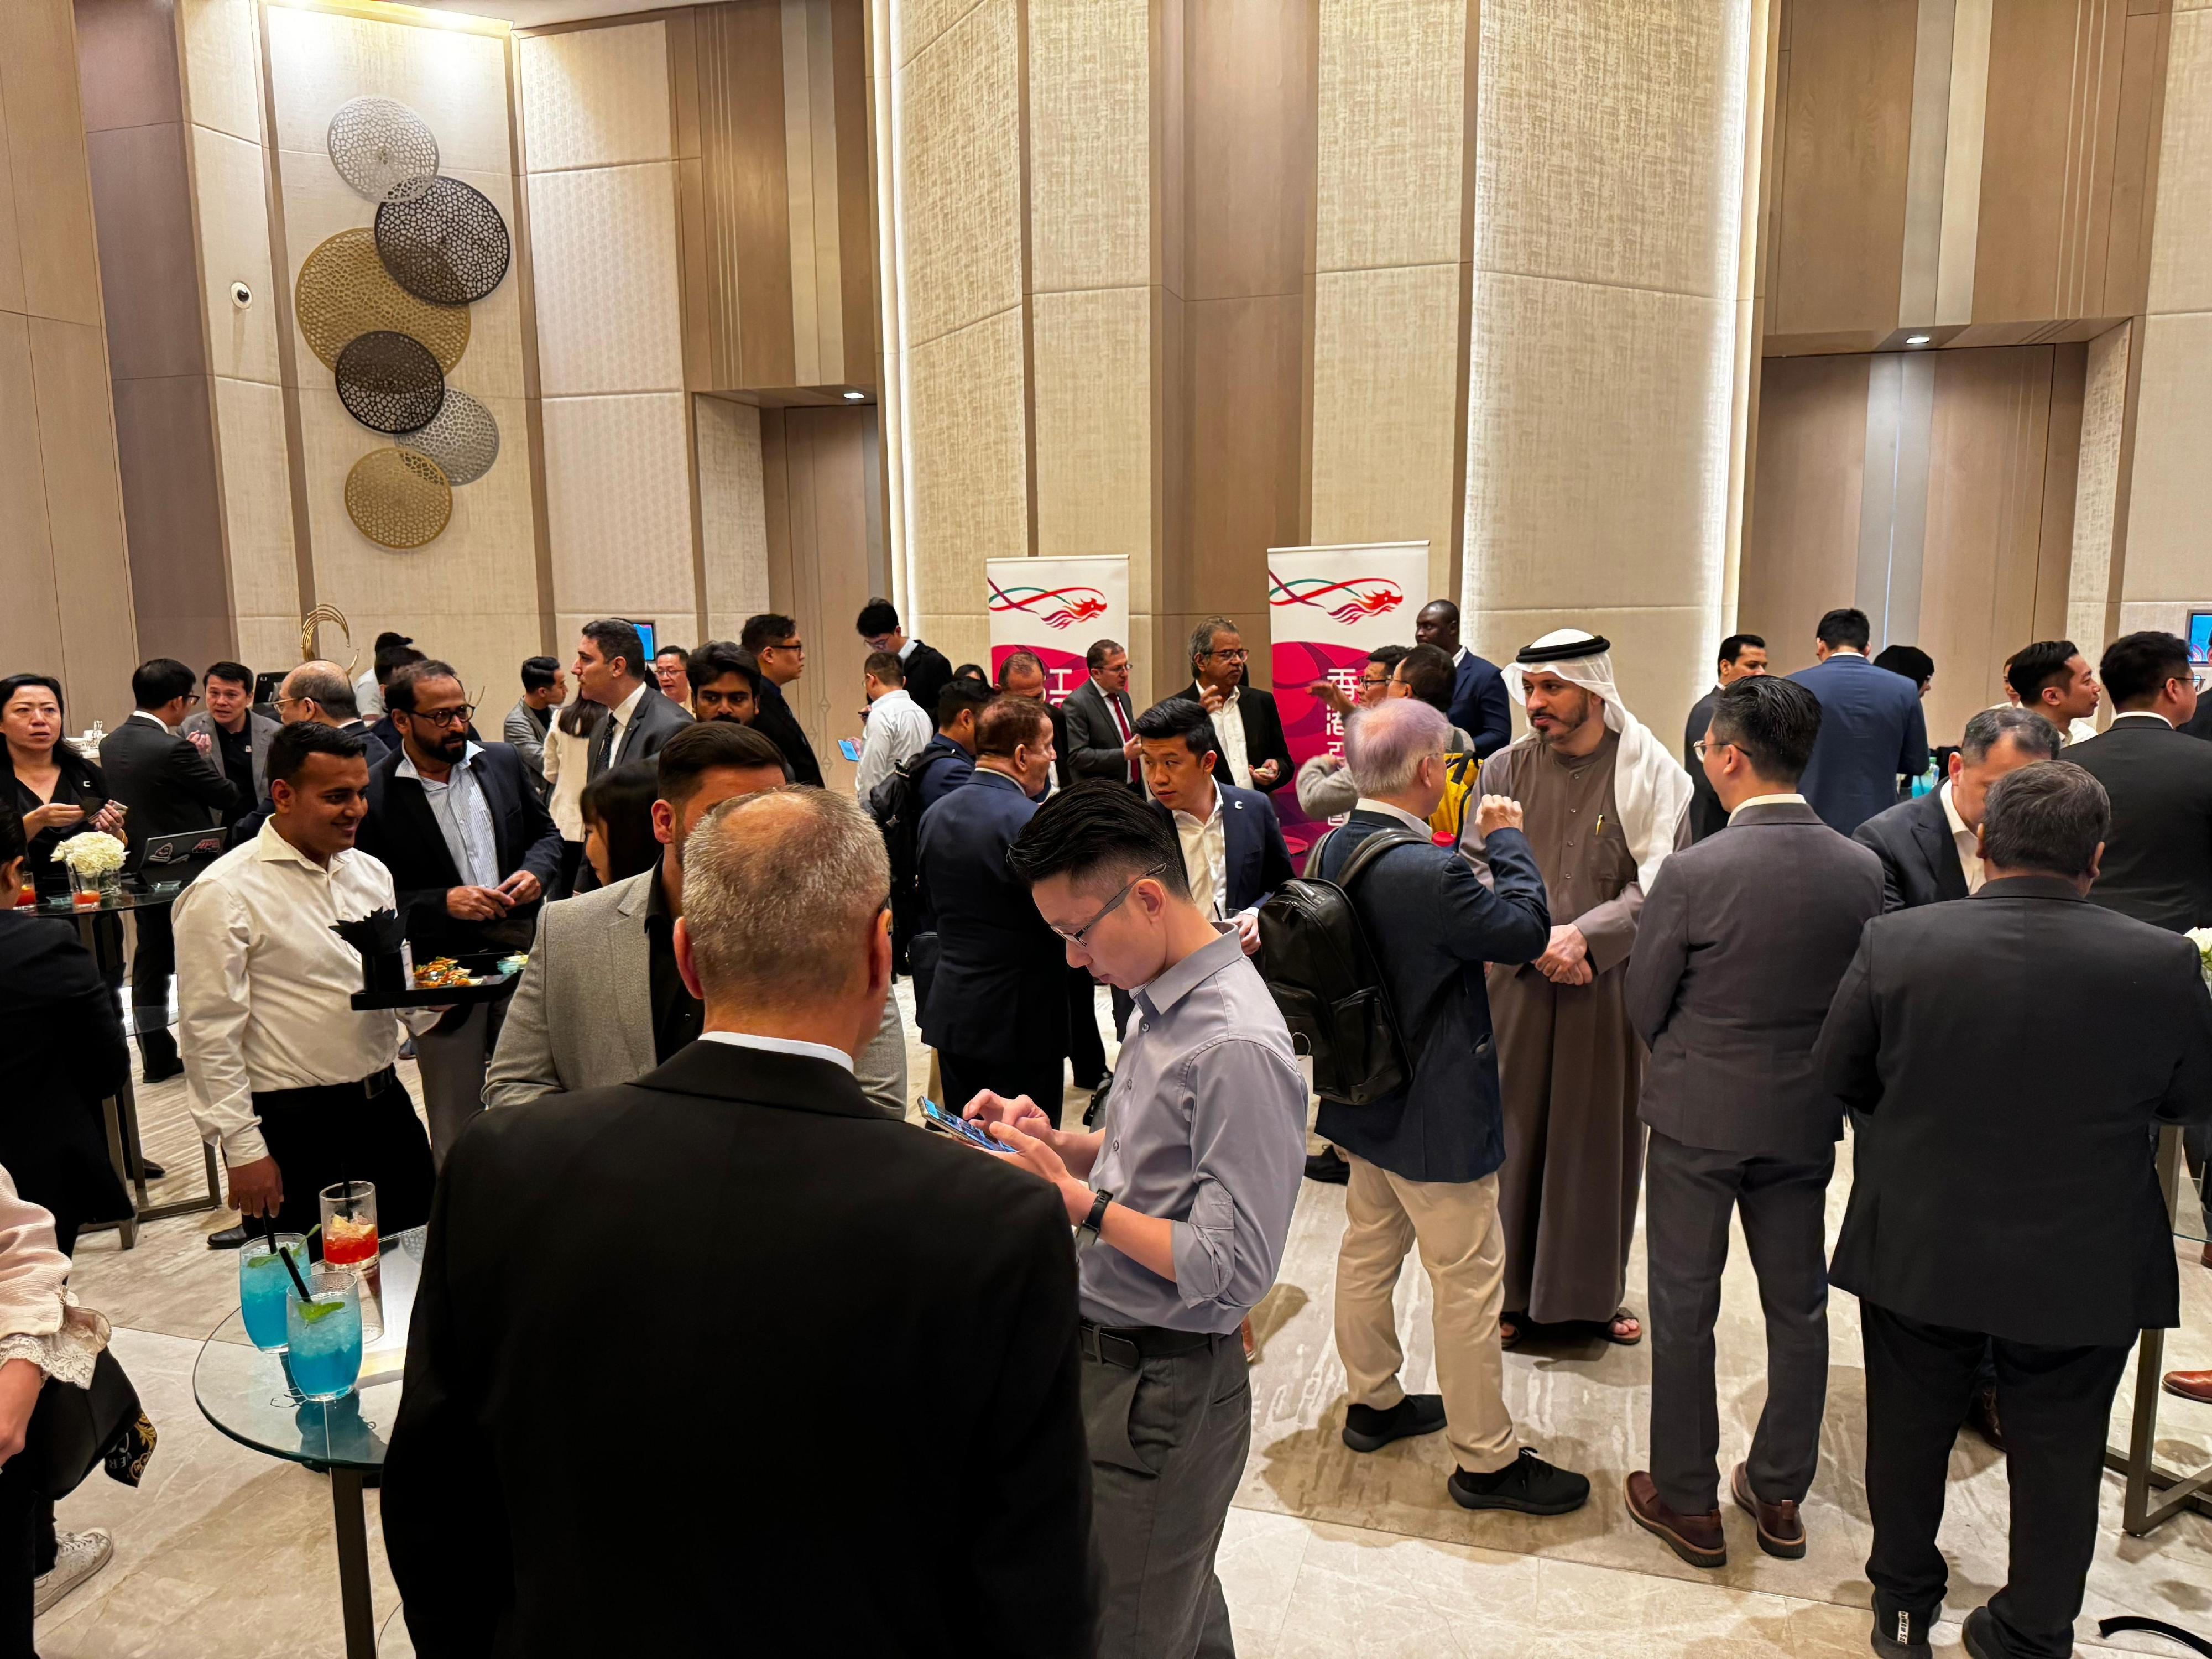 The Hong Kong Economic and Trade Office in Dubai hosted a business luncheon in Dubai, the United Arab Emirates, on March 6 (Dubai time). The event was co-organised by the Hong Kong Trade Development Council. Photo shows guests mingling before the luncheon started.